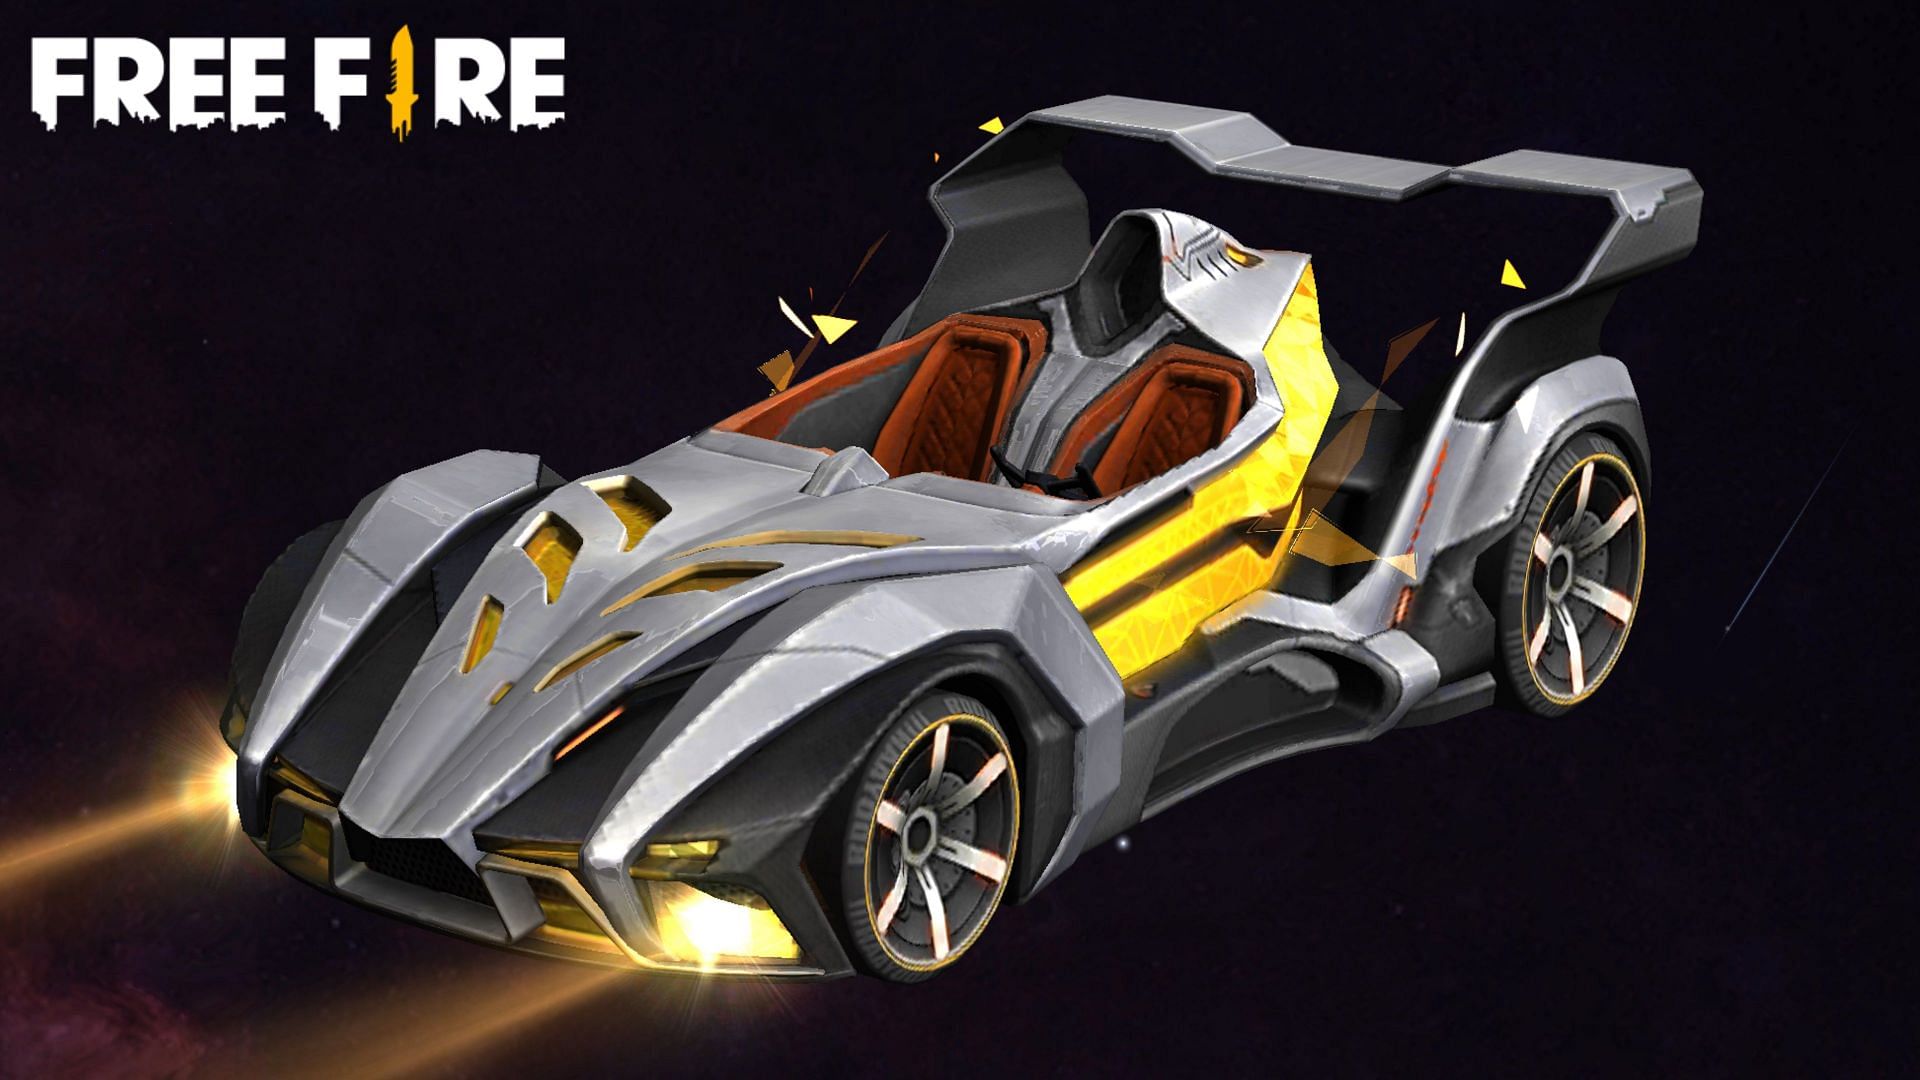 Gamers can claim this car skin for free (Image via Free Fire)